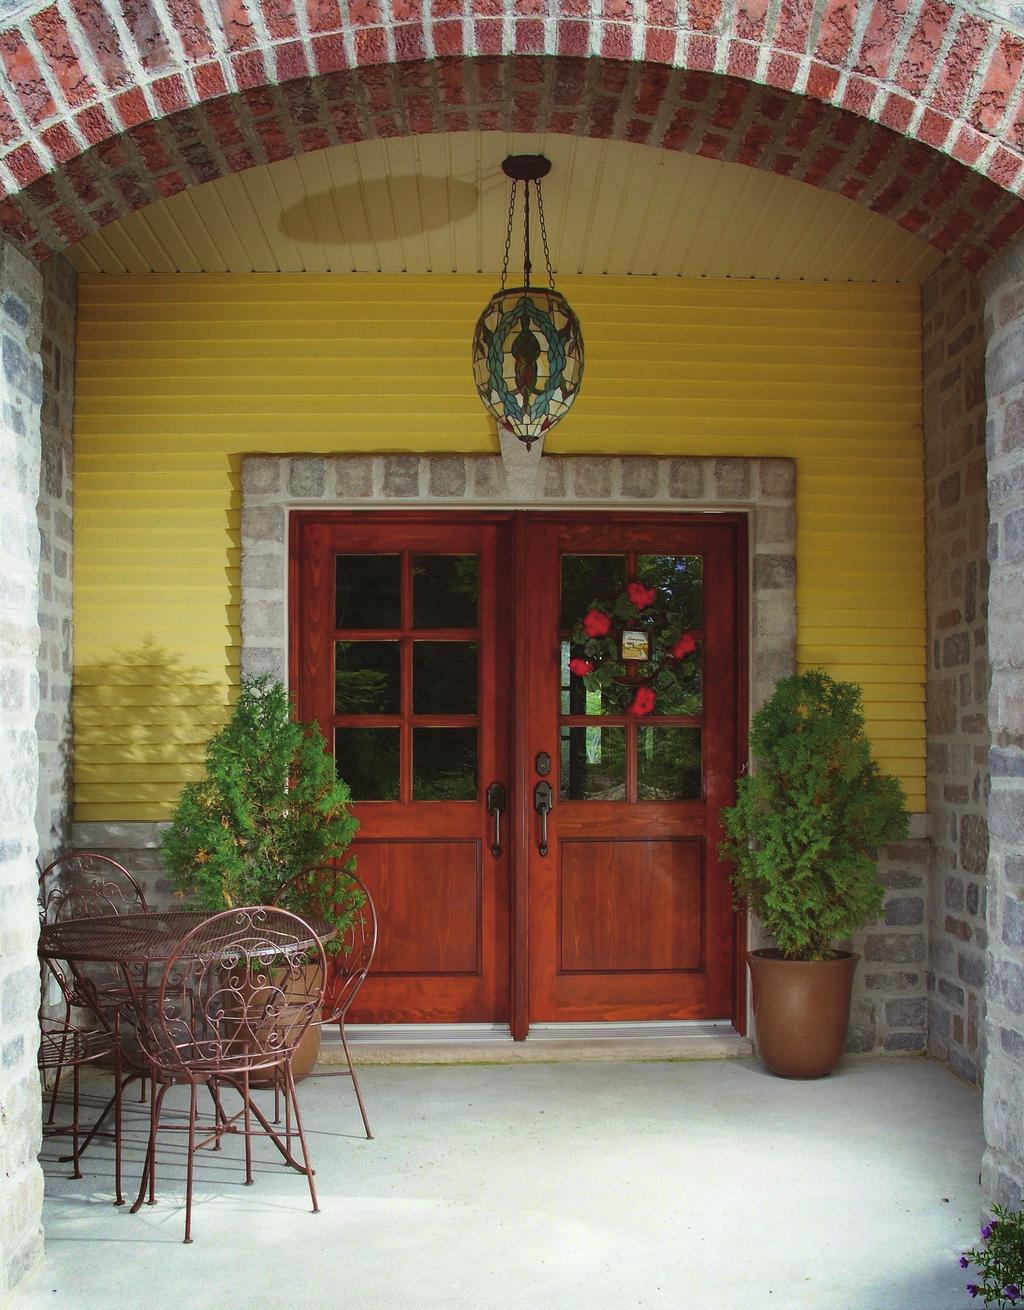 Exterior doors illustrated are